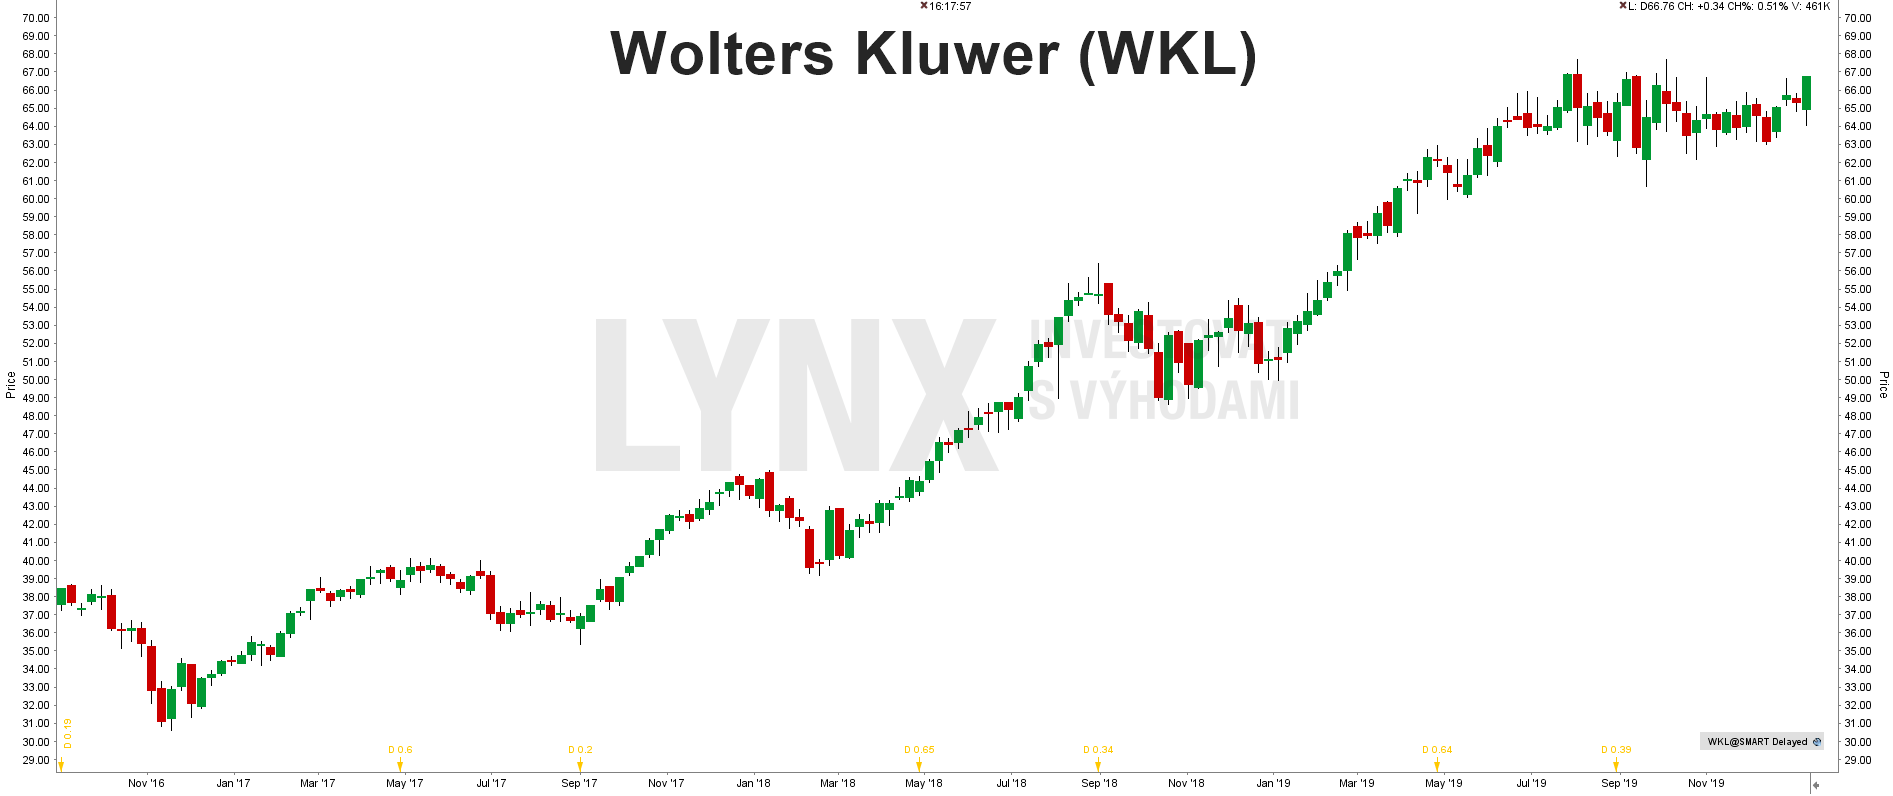 Akcie Wolters Kluwer (WKL)